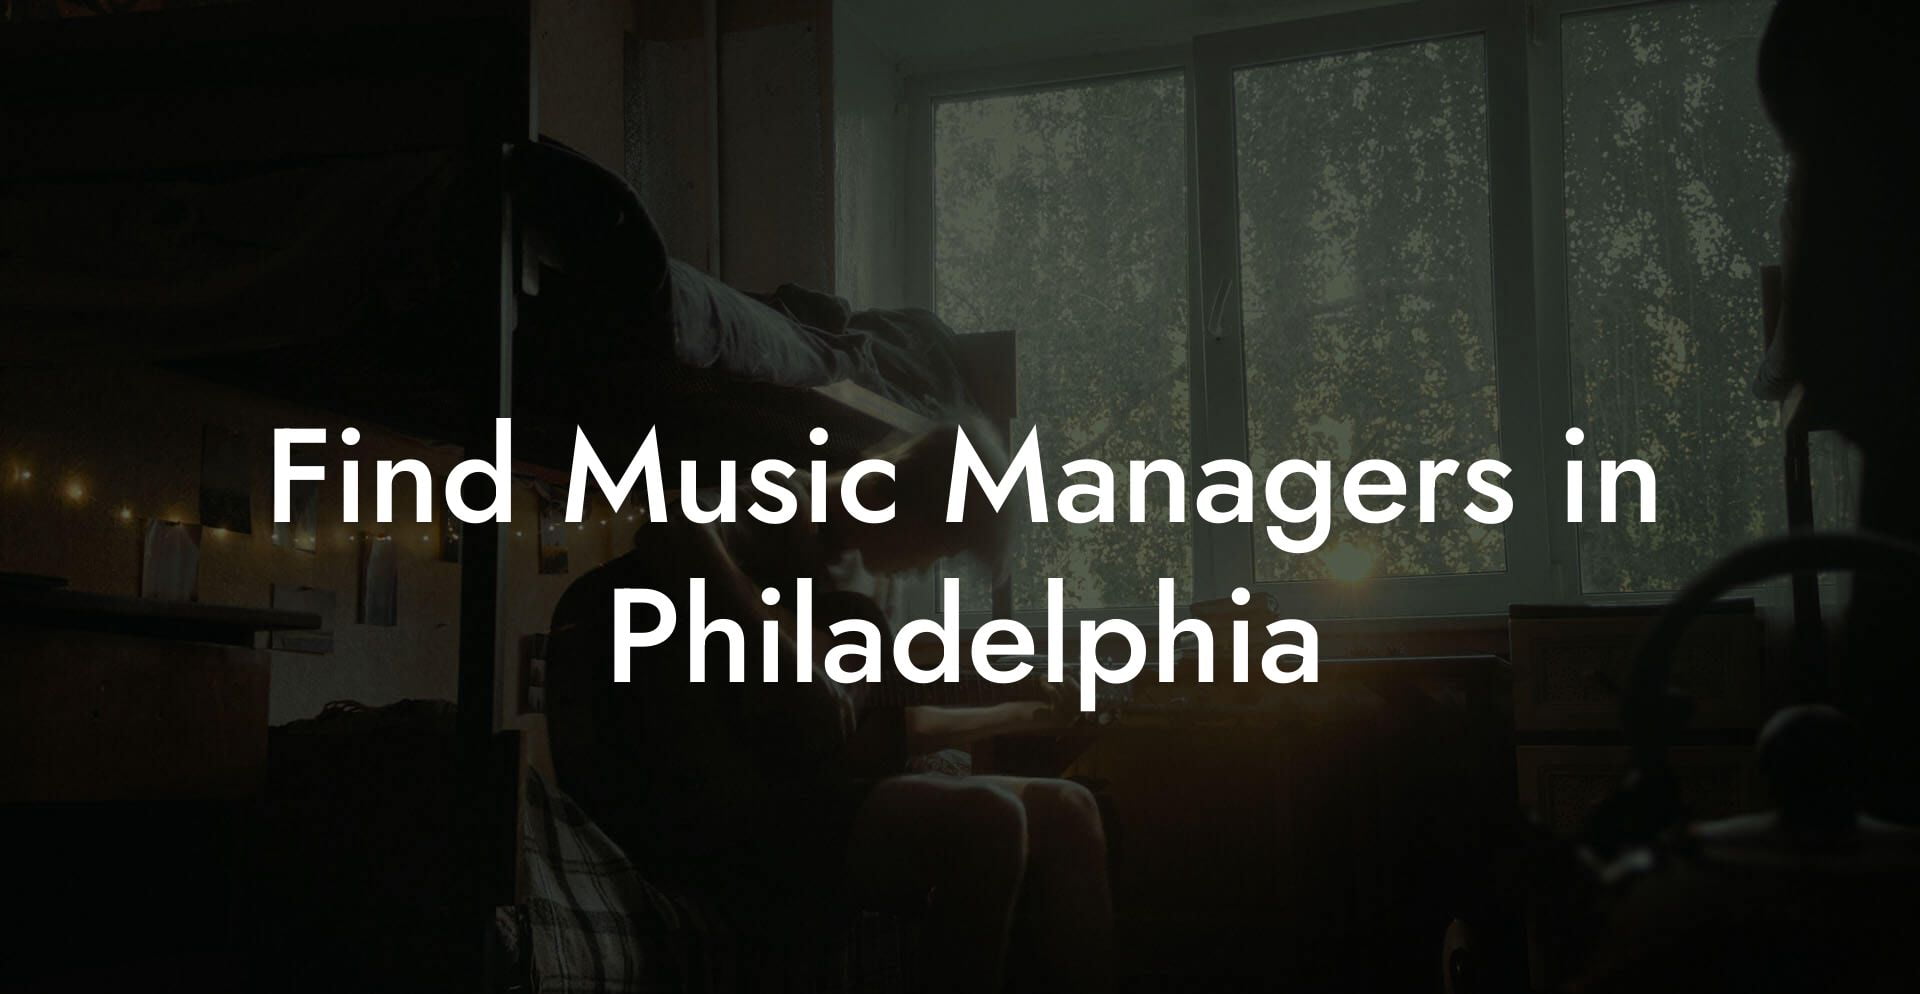 Find Music Managers in Philadelphia